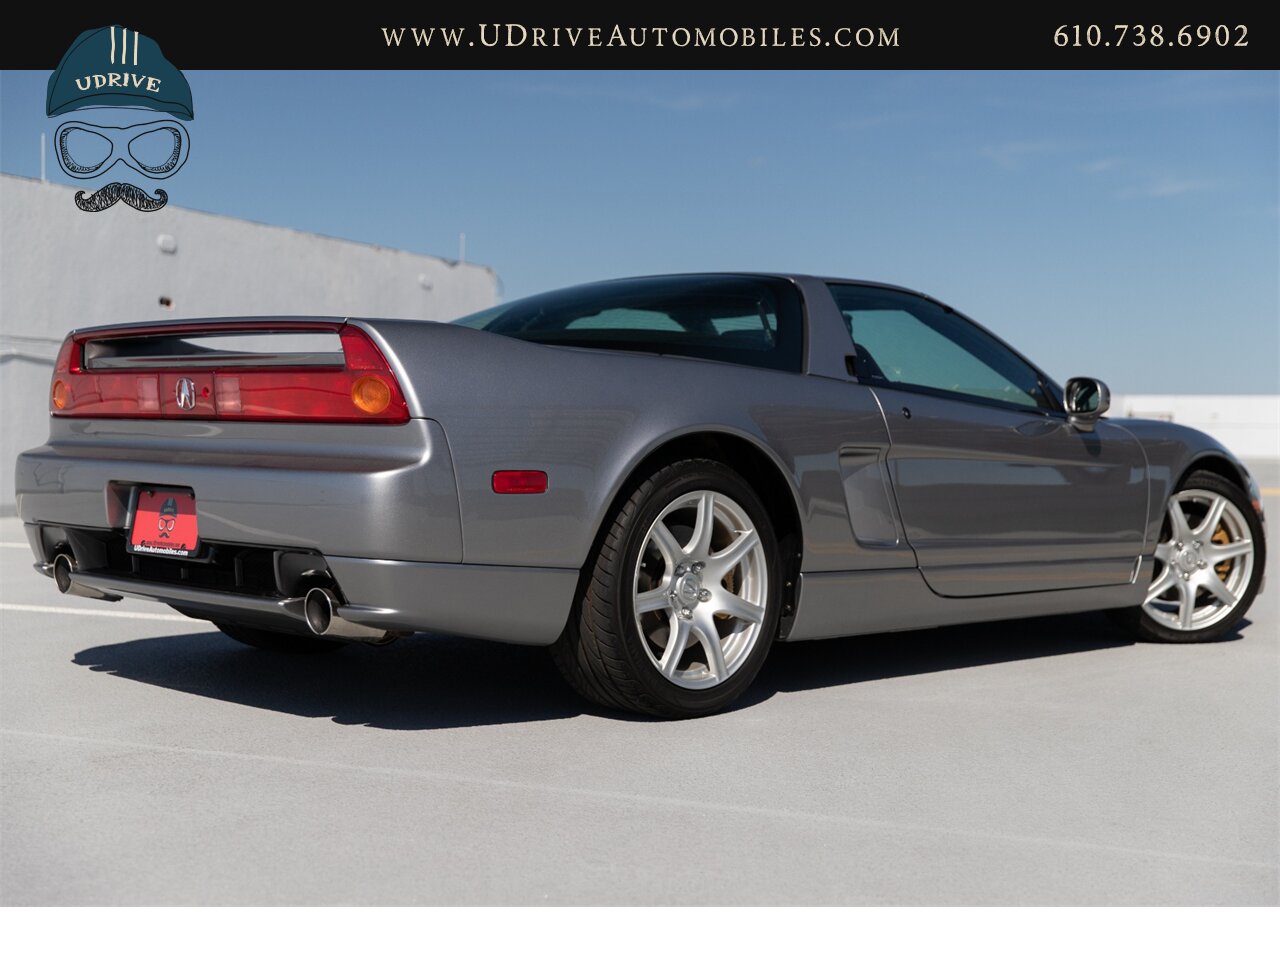 2002 Acura NSX NSX-T 9k Miles 6 Speed Manual Service History  Collector Grade - Photo 3 - West Chester, PA 19382